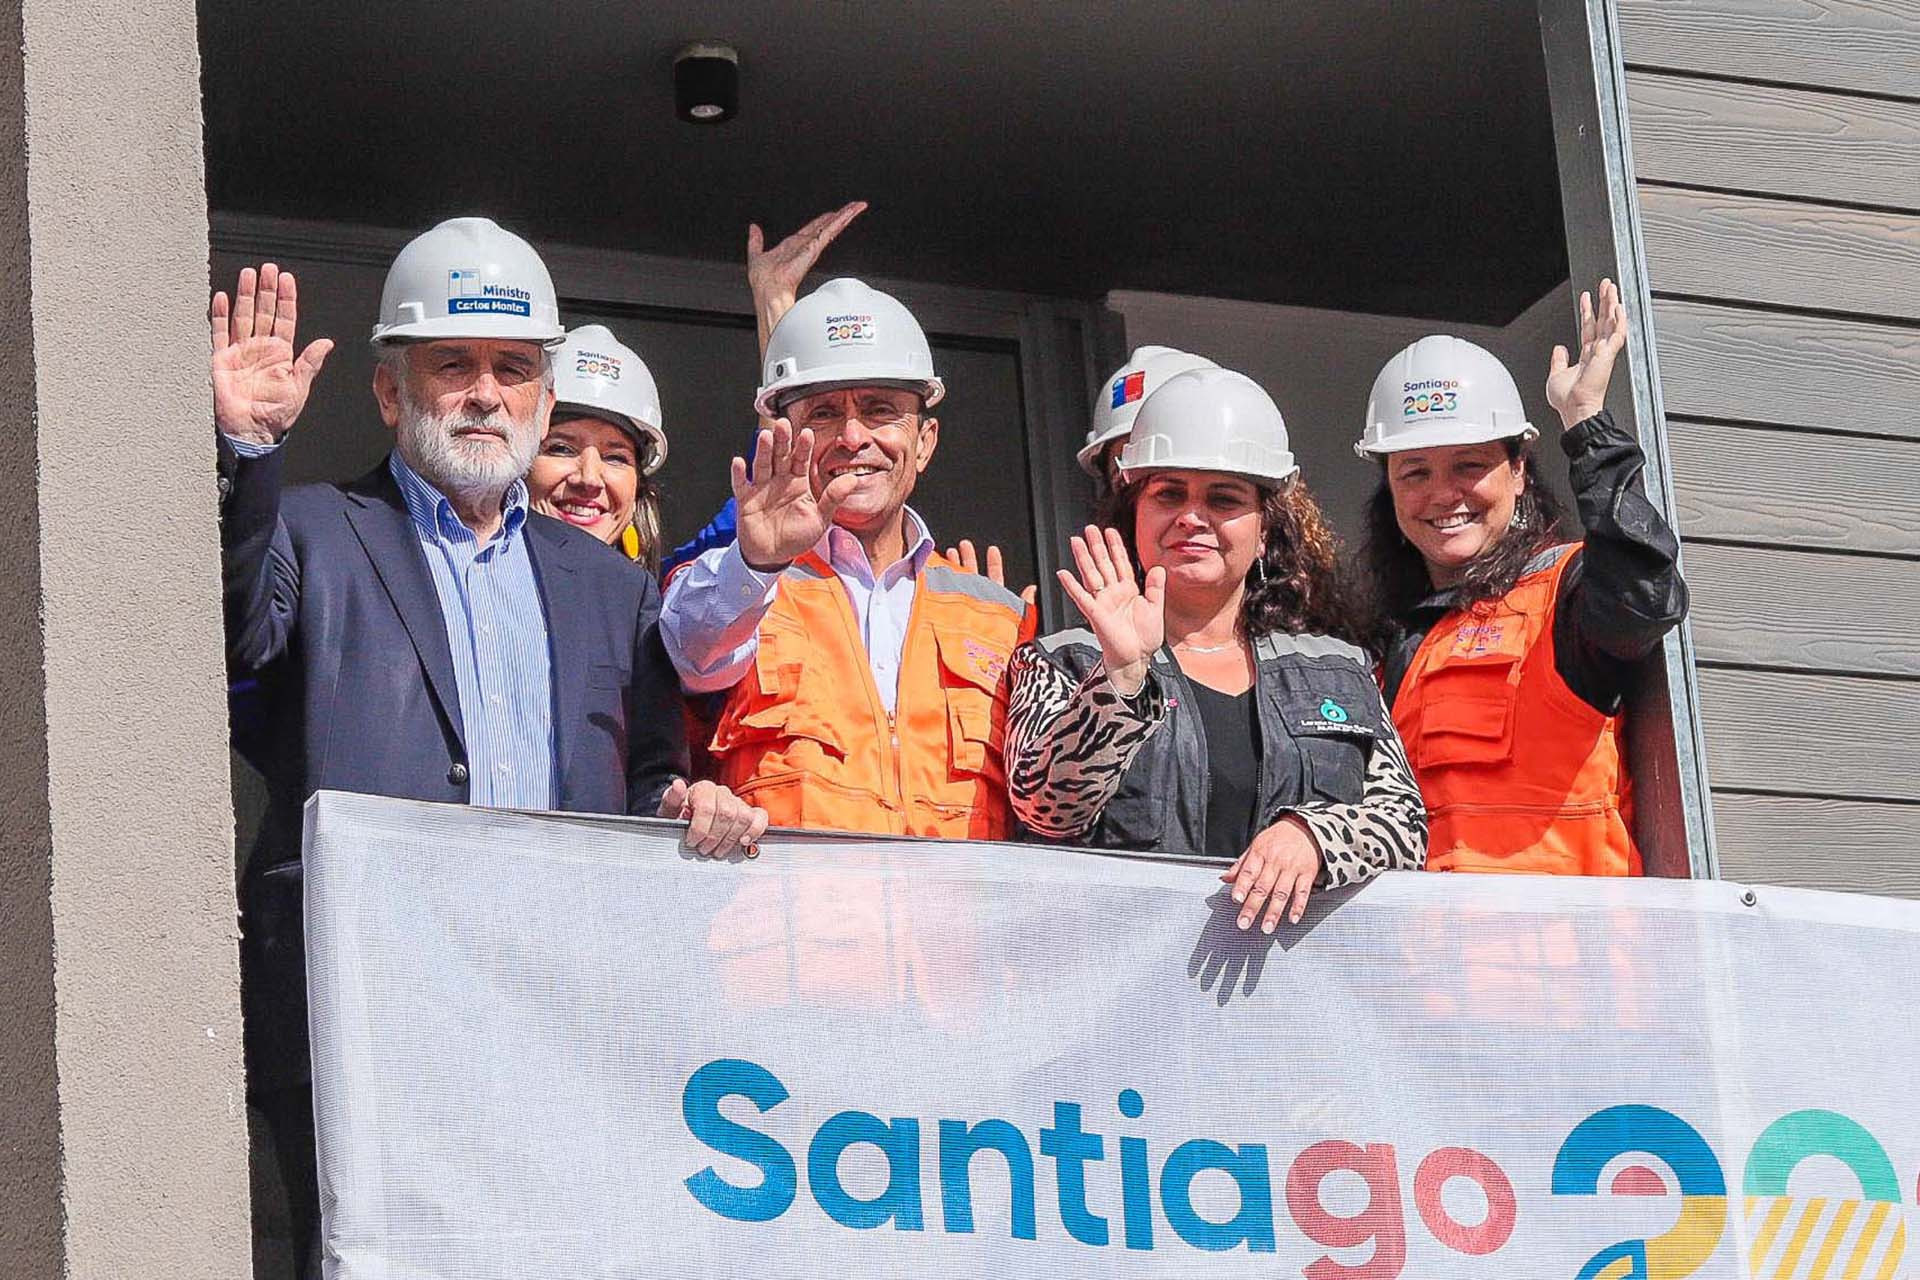 Organisers claim Santiago 2023 Athletes' Village is more than 80 per cent complete